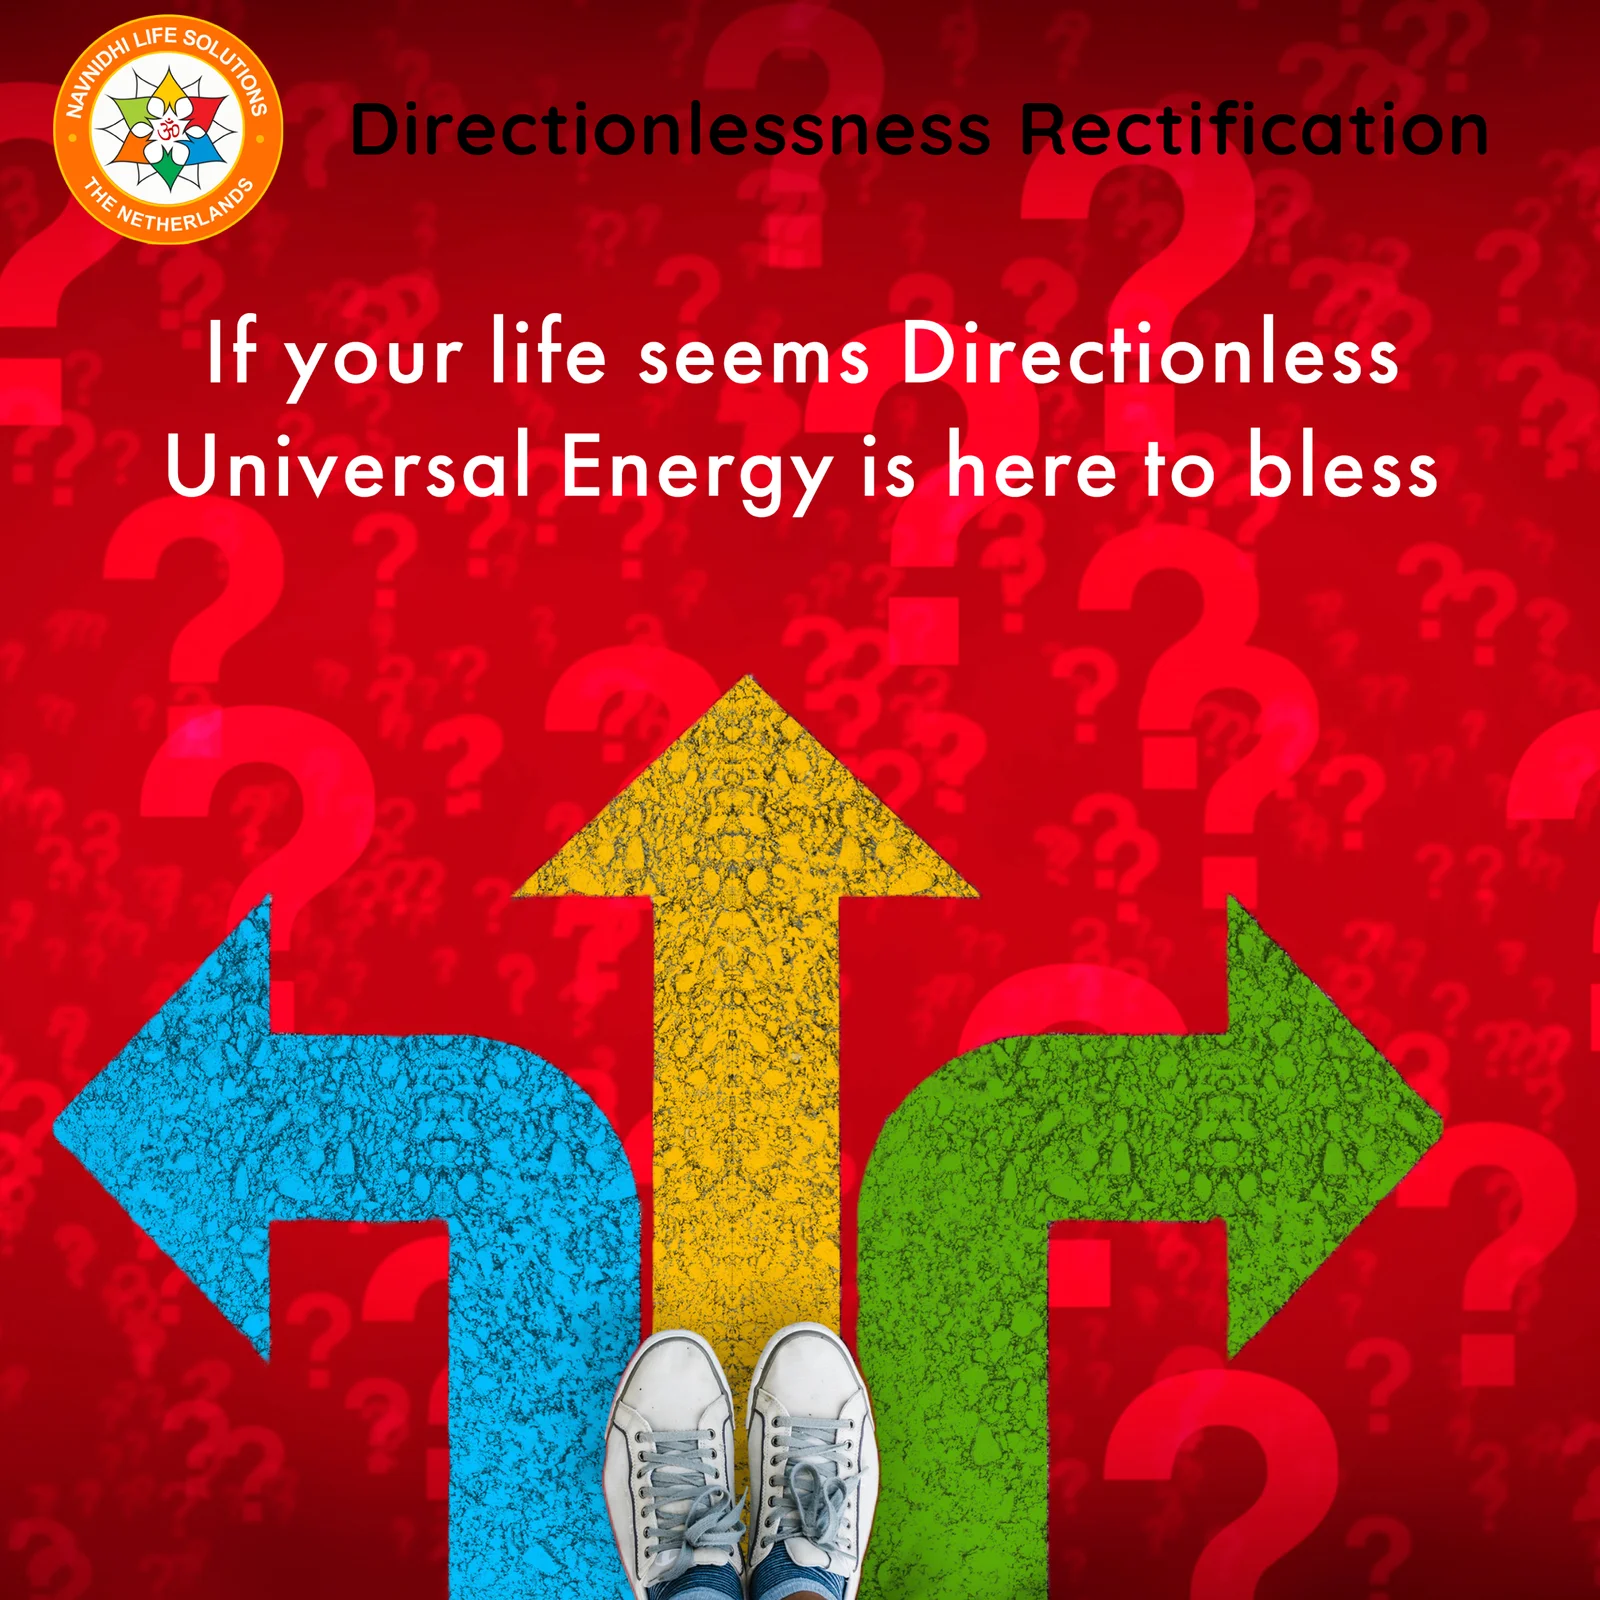 Directionlessness Rectification